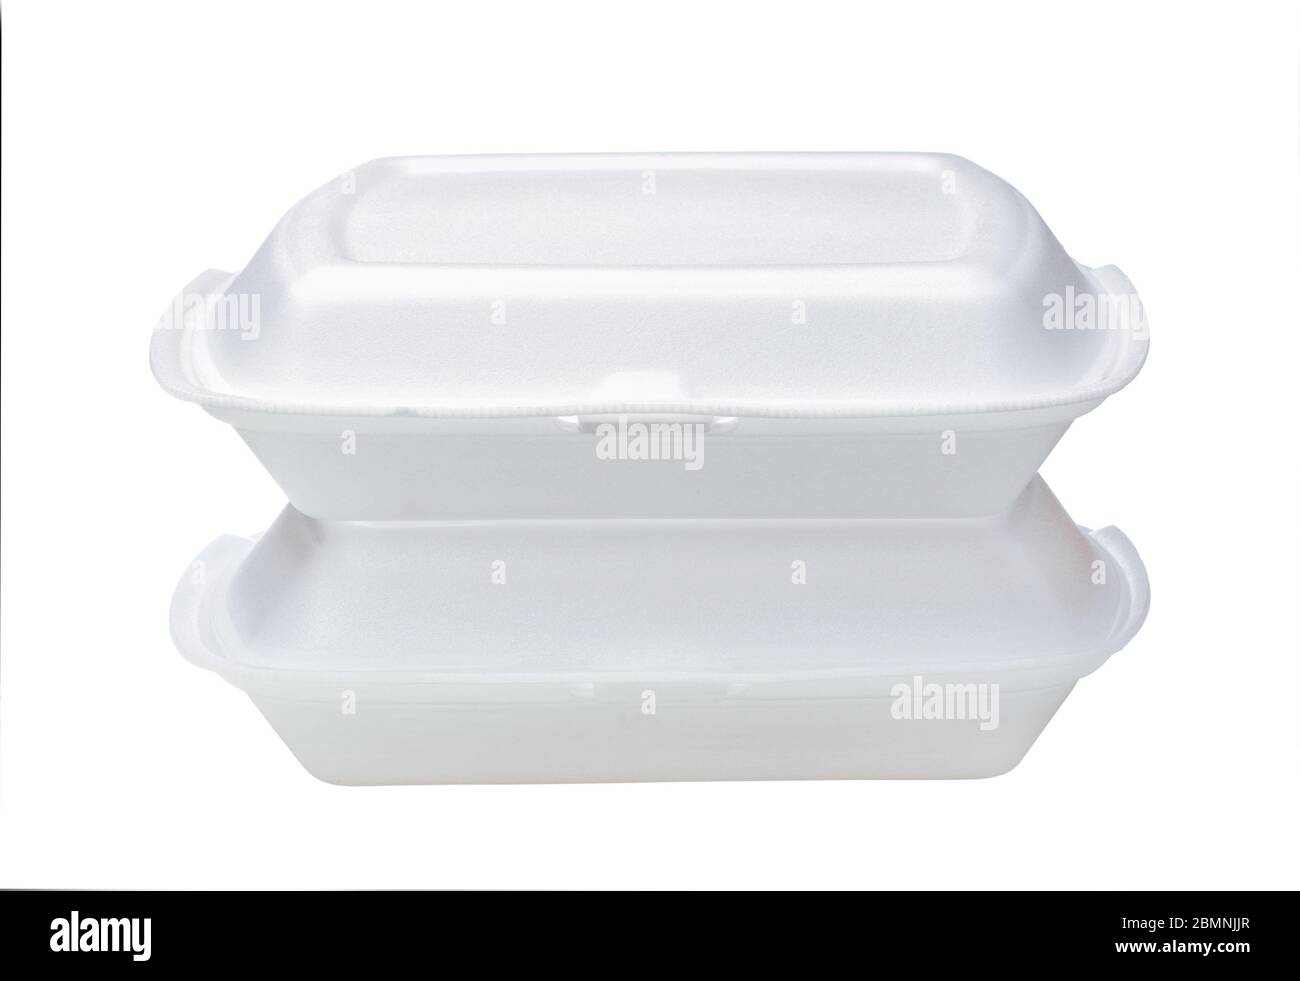 Two white polystyrene take out containers isolated on white background. Stock Photo